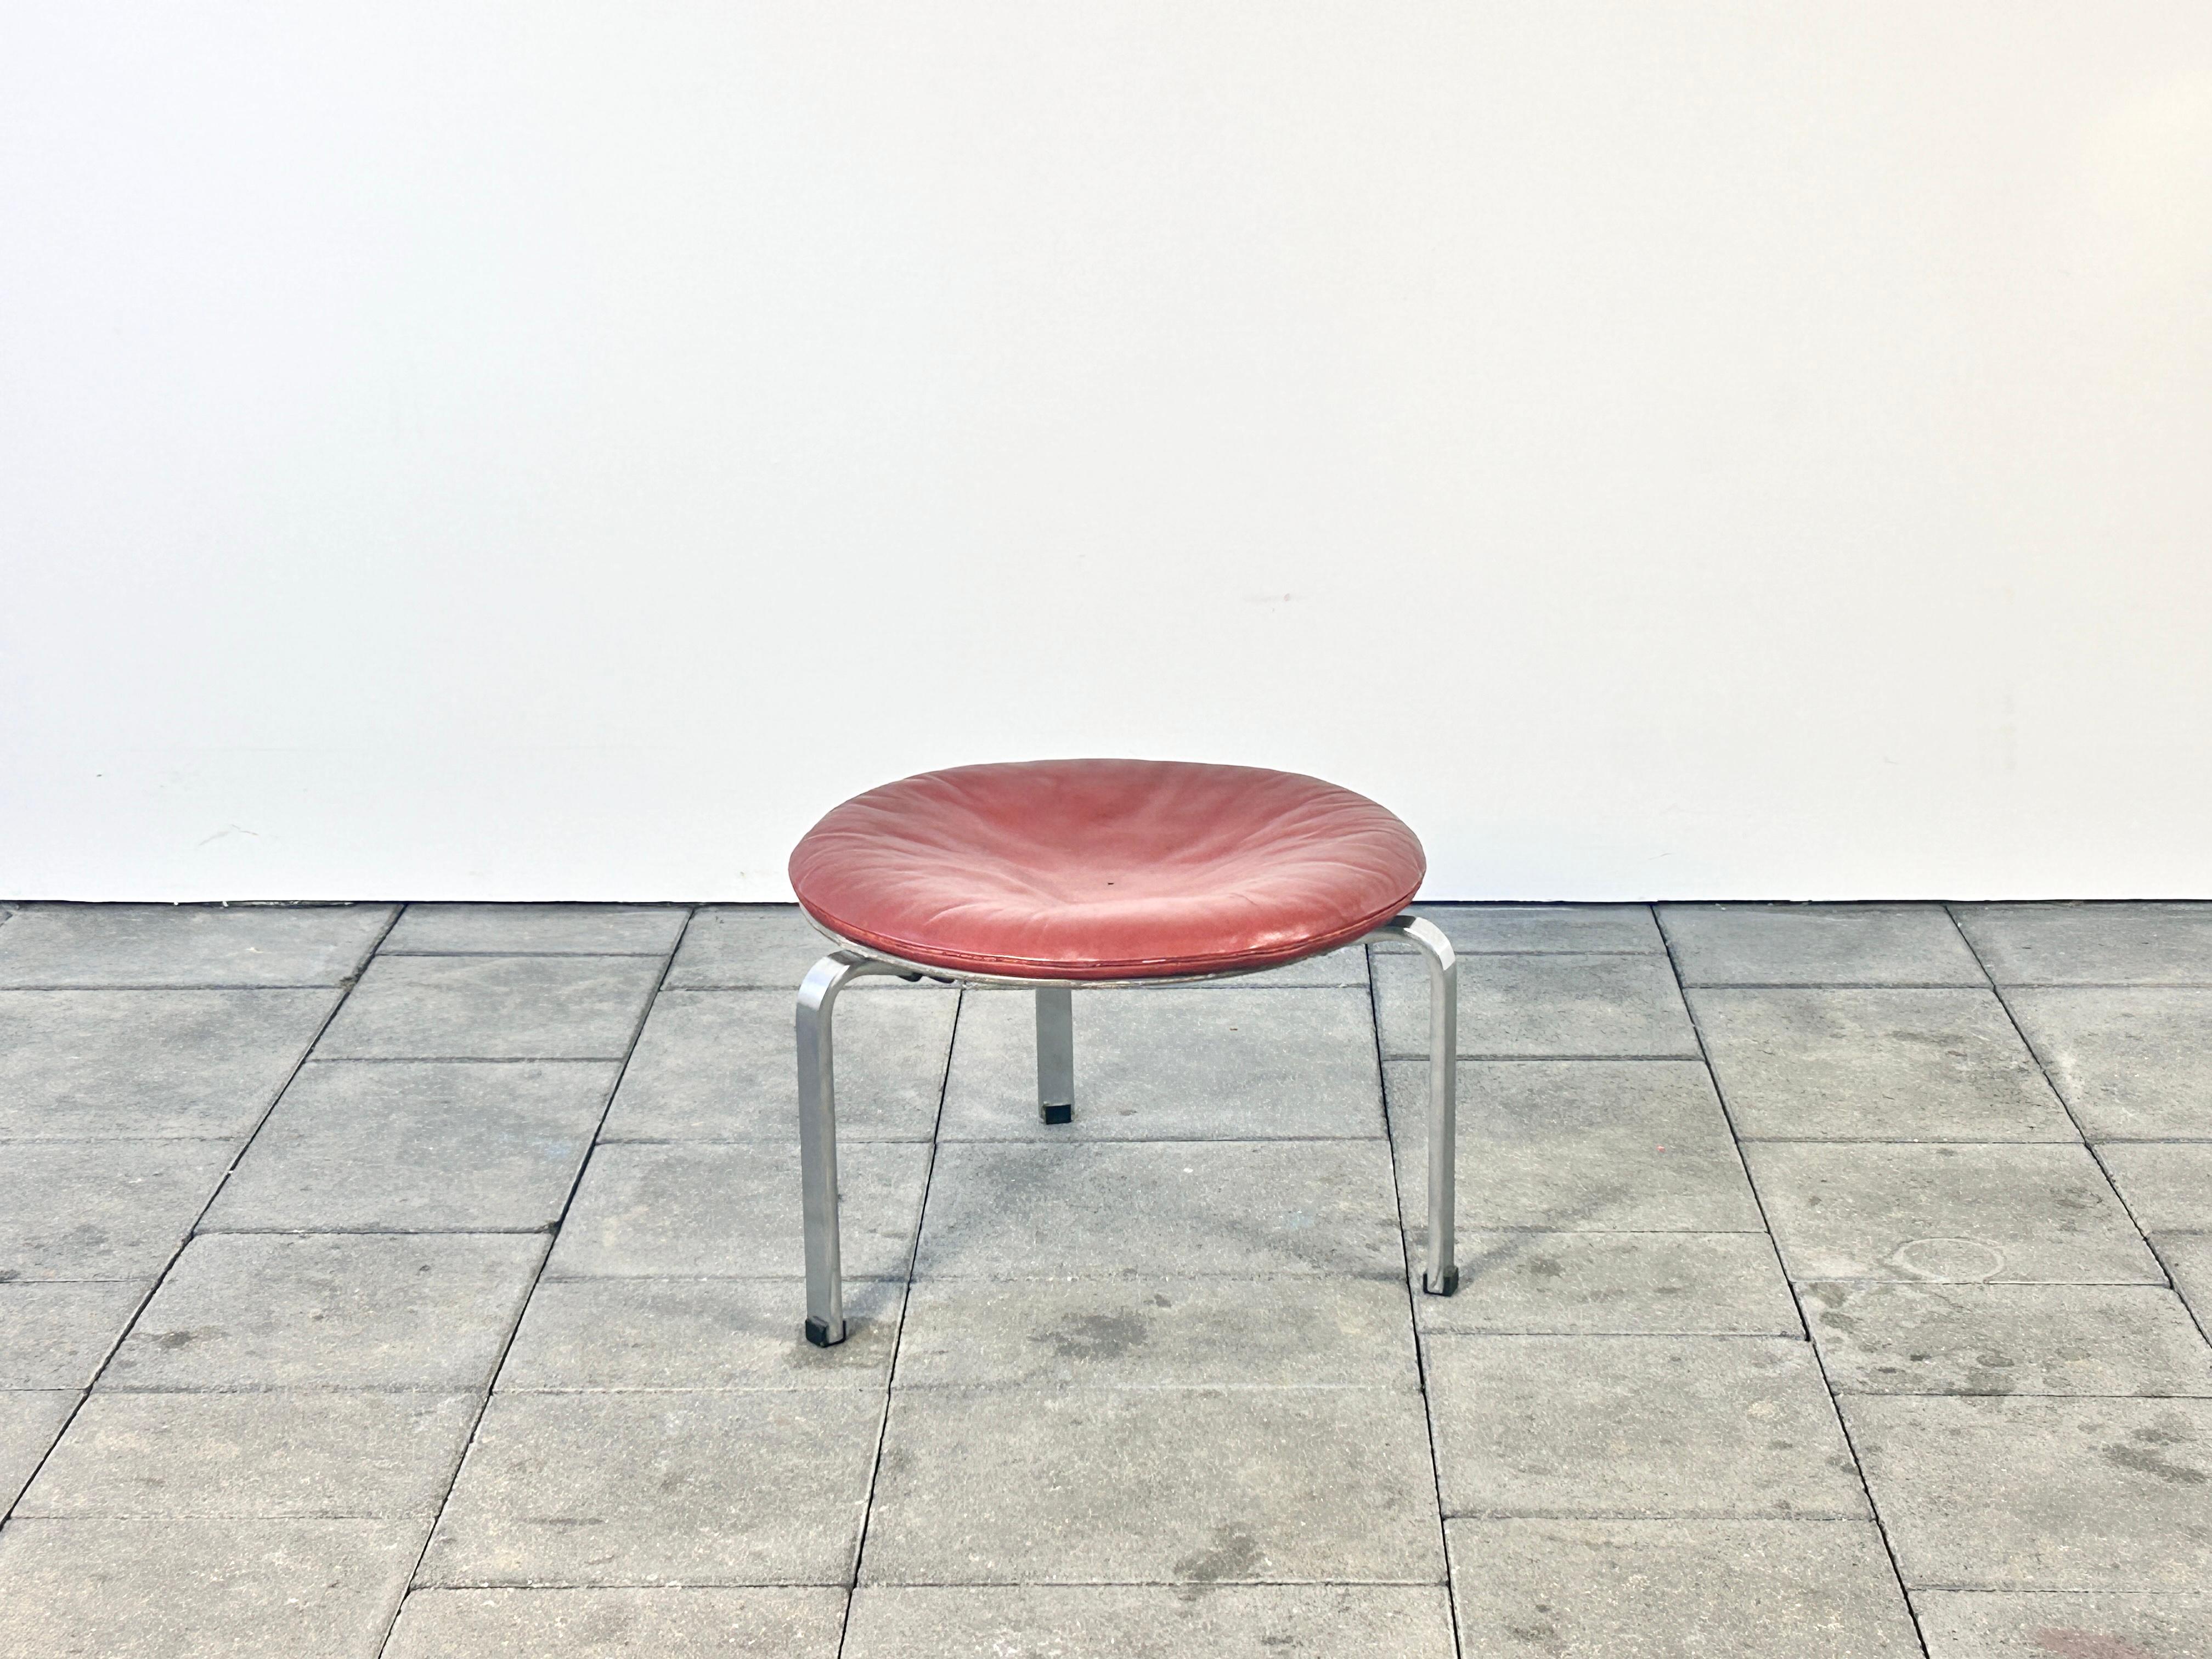 very important and rare PK33 stool 
designed by Poul Kjaerholm in red-brown leather.

Manufactured by E. Kold Christensen, Denmark, ca 1960ies, with makers emblem.

The designs of the famous Dane Poul Kjaerholm have had great influence on postwar